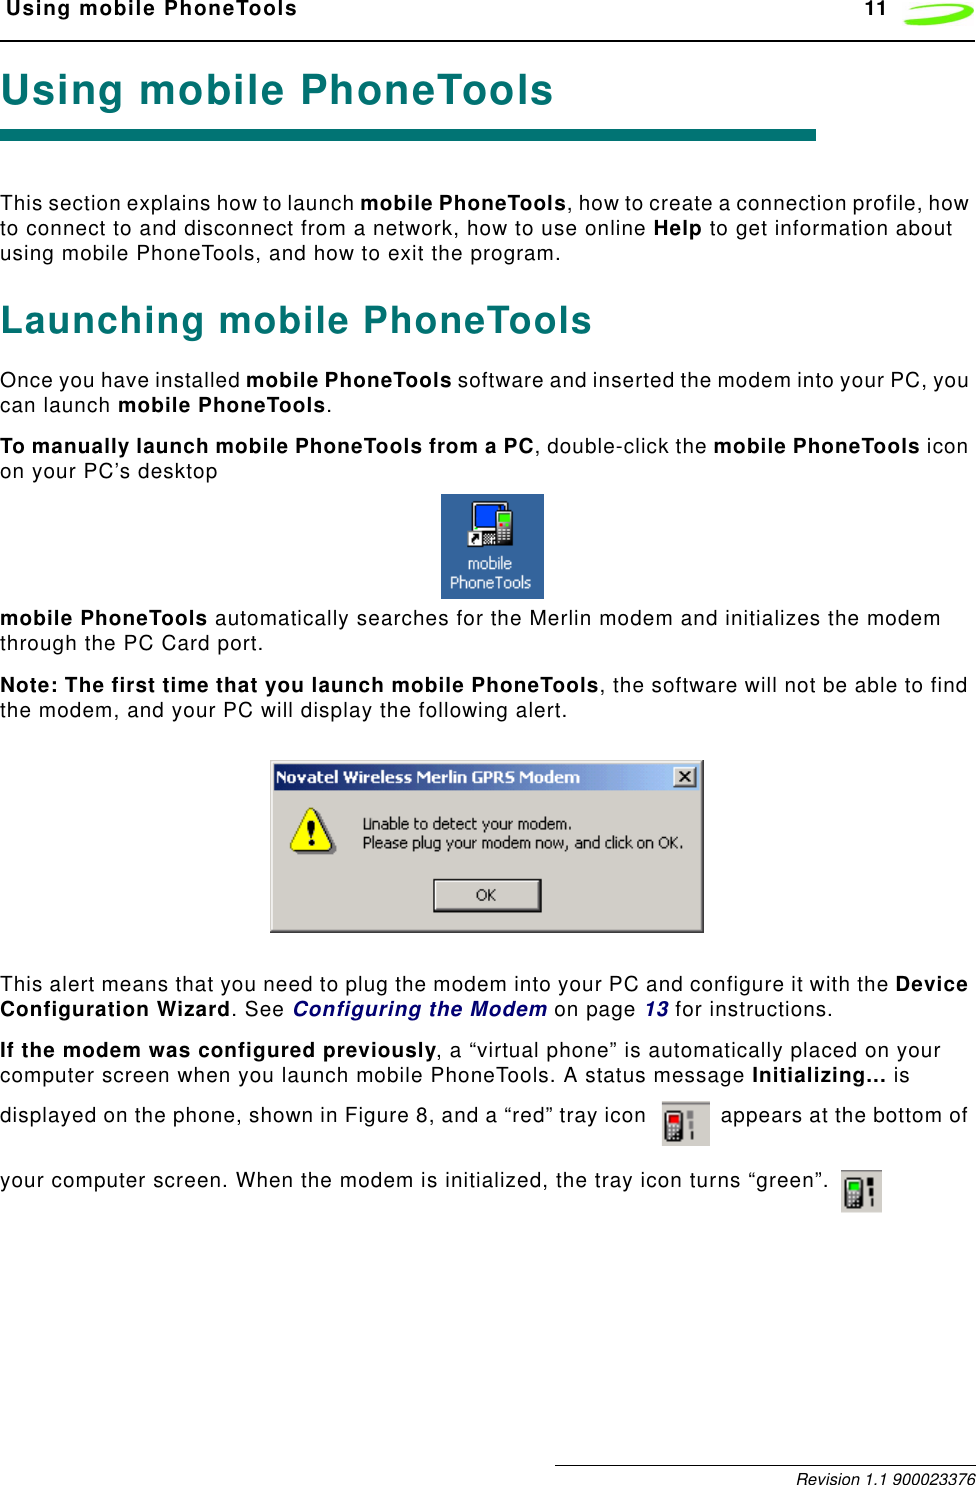  Using mobile PhoneTools 11 Revision 1.1 900023376Using mobile PhoneToolsThis section explains how to launch mobile PhoneTools, how to create a connection profile, how to connect to and disconnect from a network, how to use online Help to get information about using mobile PhoneTools, and how to exit the program.Launching mobile PhoneToolsOnce you have installed mobile PhoneTools software and inserted the modem into your PC, you can launch mobile PhoneTools.To manually launch mobile PhoneTools from a PC, double-click the mobile PhoneTools icon on your PC’s desktop  mobile PhoneTools automatically searches for the Merlin modem and initializes the modem through the PC Card port. Note: The first time that you launch mobile PhoneTools, the software will not be able to find the modem, and your PC will display the following alert. This alert means that you need to plug the modem into your PC and configure it with the Device Configuration Wizard. See Configuring the Modem on page 13 for instructions.If the modem was configured previously, a “virtual phone” is automatically placed on your computer screen when you launch mobile PhoneTools. A status message Initializing... is displayed on the phone, shown in Figure 8, and a “red” tray icon   appears at the bottom of your computer screen. When the modem is initialized, the tray icon turns “green”.